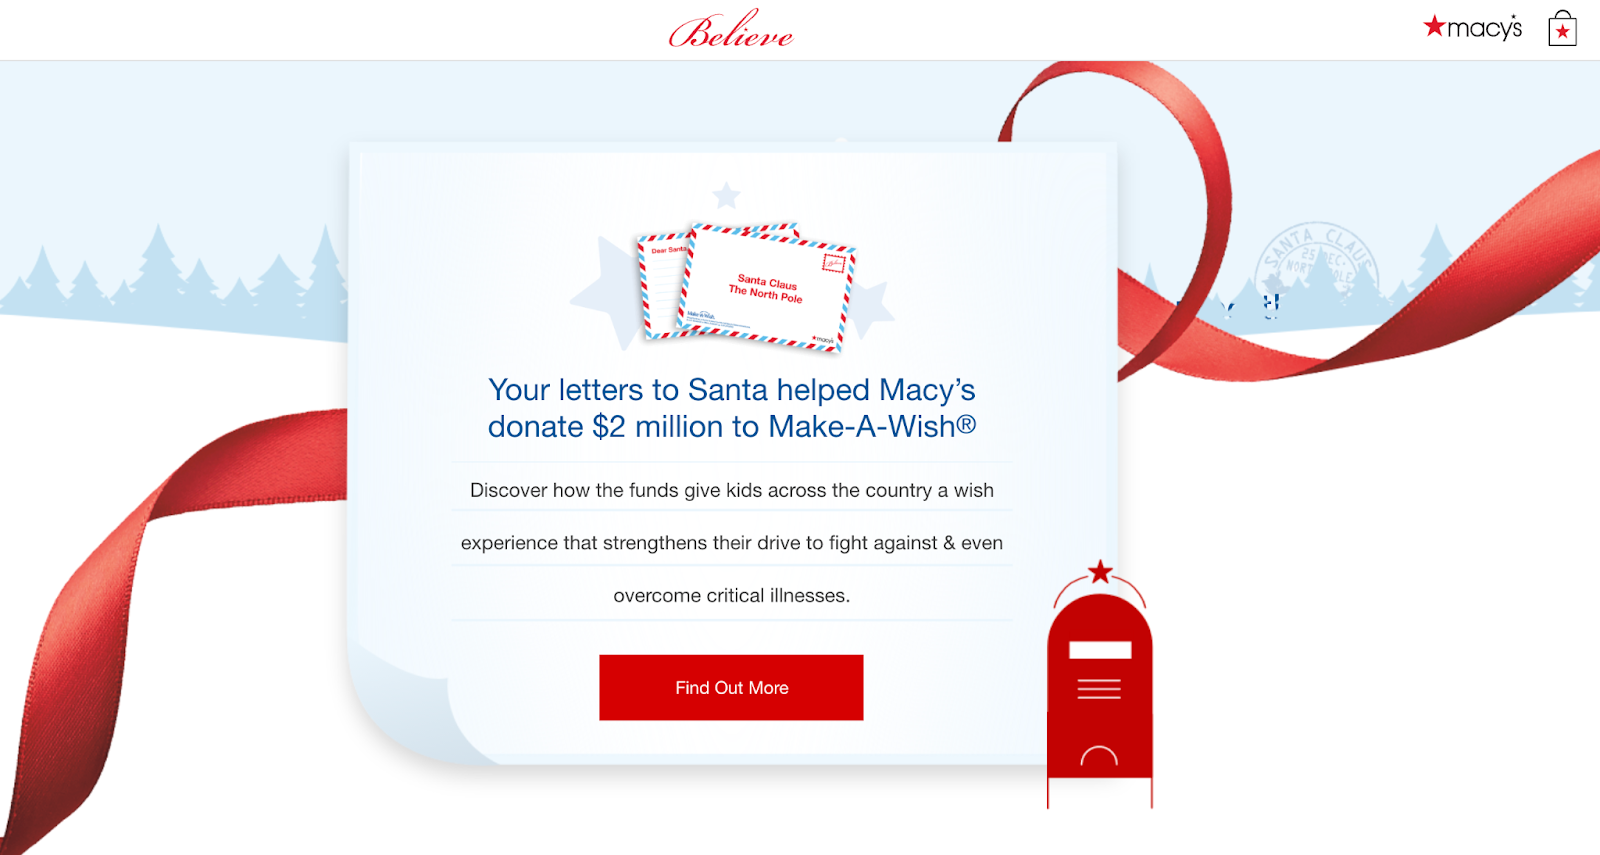 macy's believe holiday marketing campaign